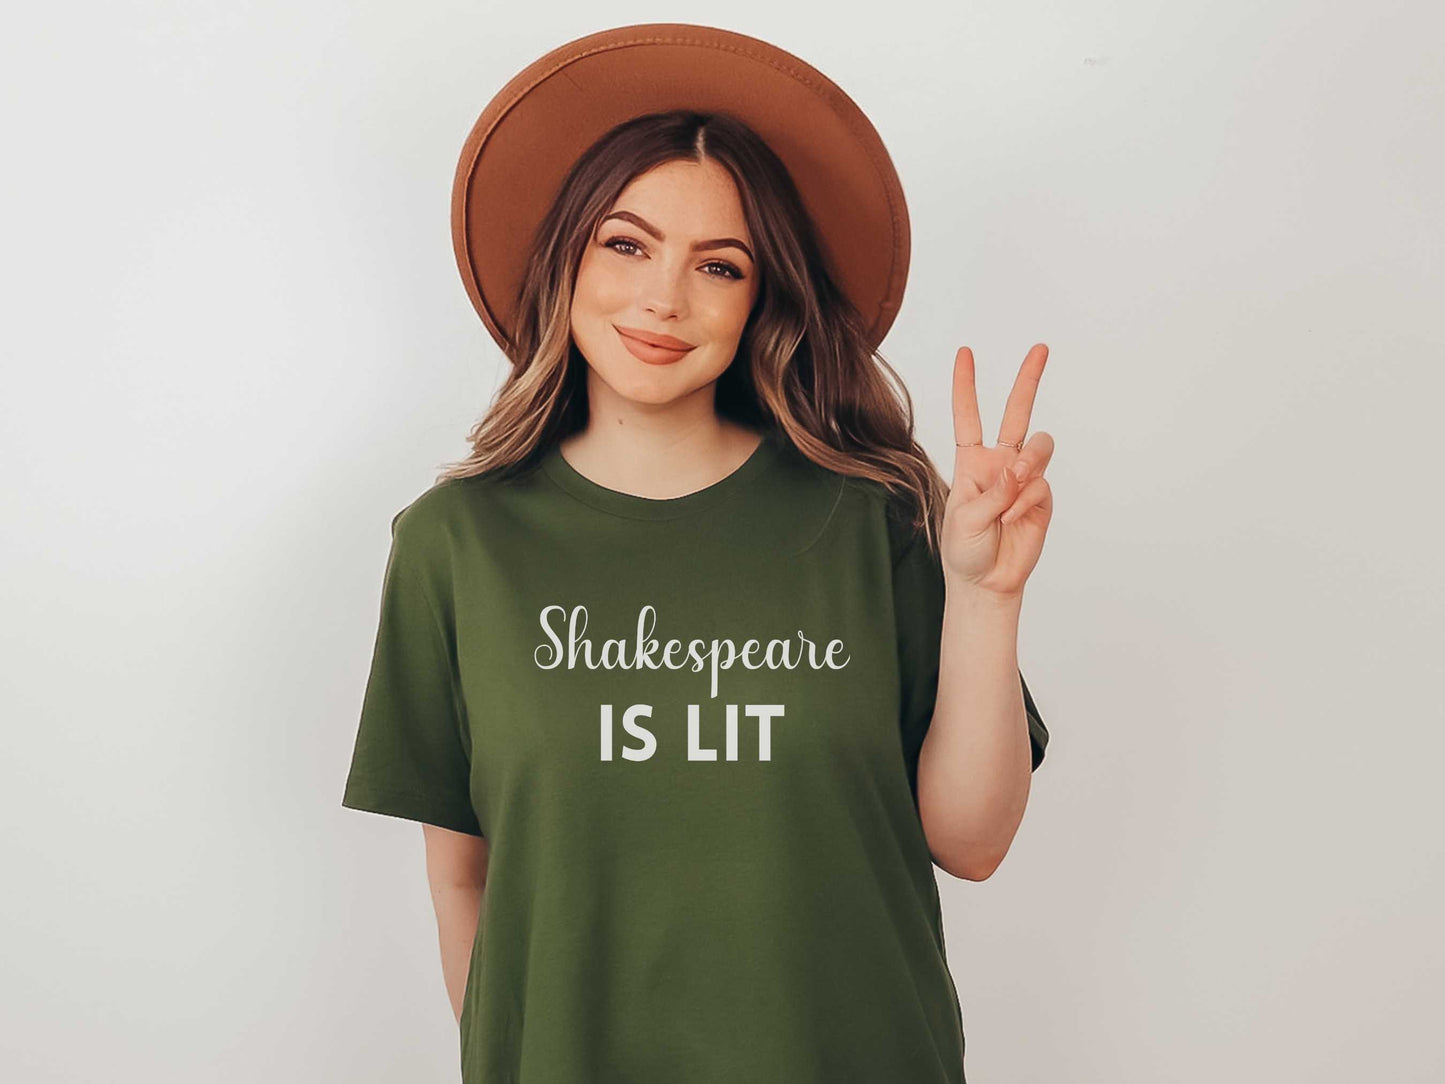 Funny Shakespeare T-Shirt in Olive